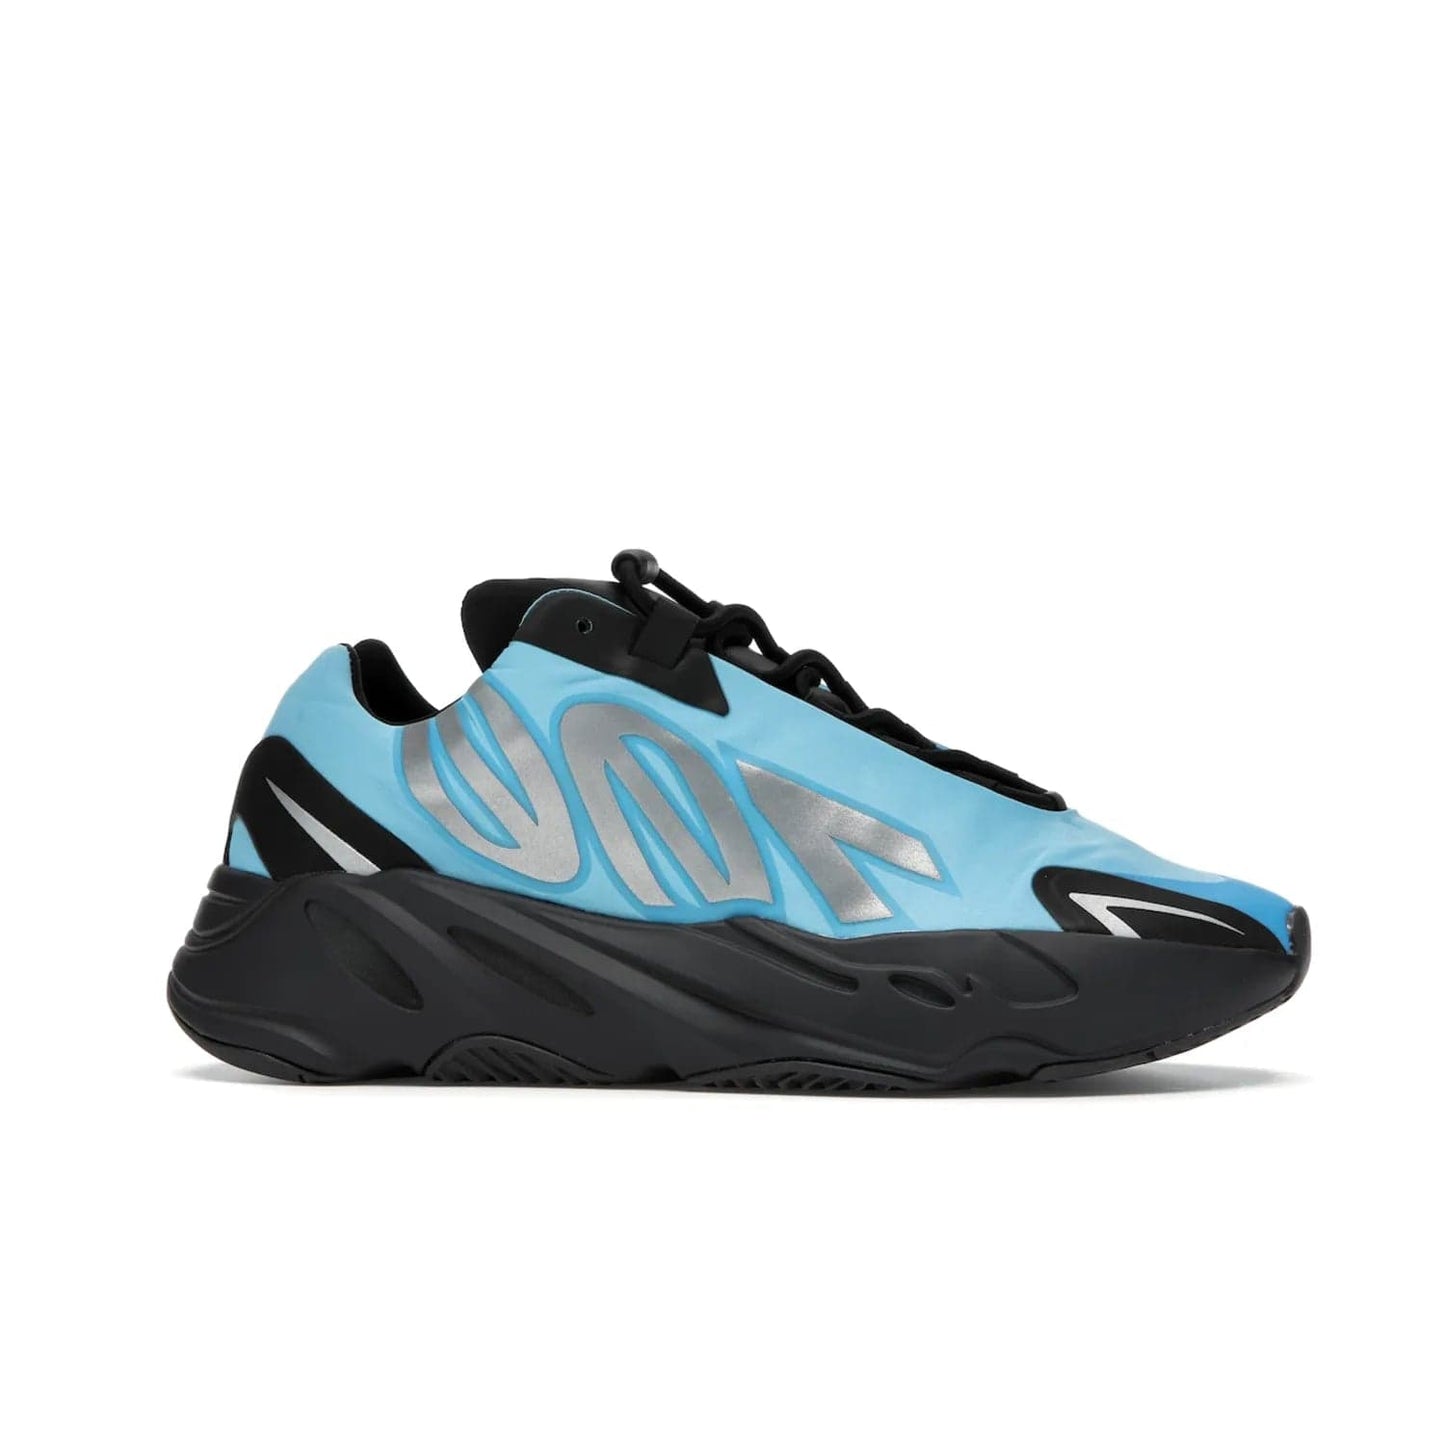 adidas Yeezy Boost 700 MNVN Bright Cyan - Image 2 - Only at www.BallersClubKickz.com - The adidas Yeezy Boost 700 MNVN features a Bright Cyan nylon upper with iconic "700" graphics and a sculptural black Boost sole for superior style and comfort. Step into legendary style and comfort in June 2021.